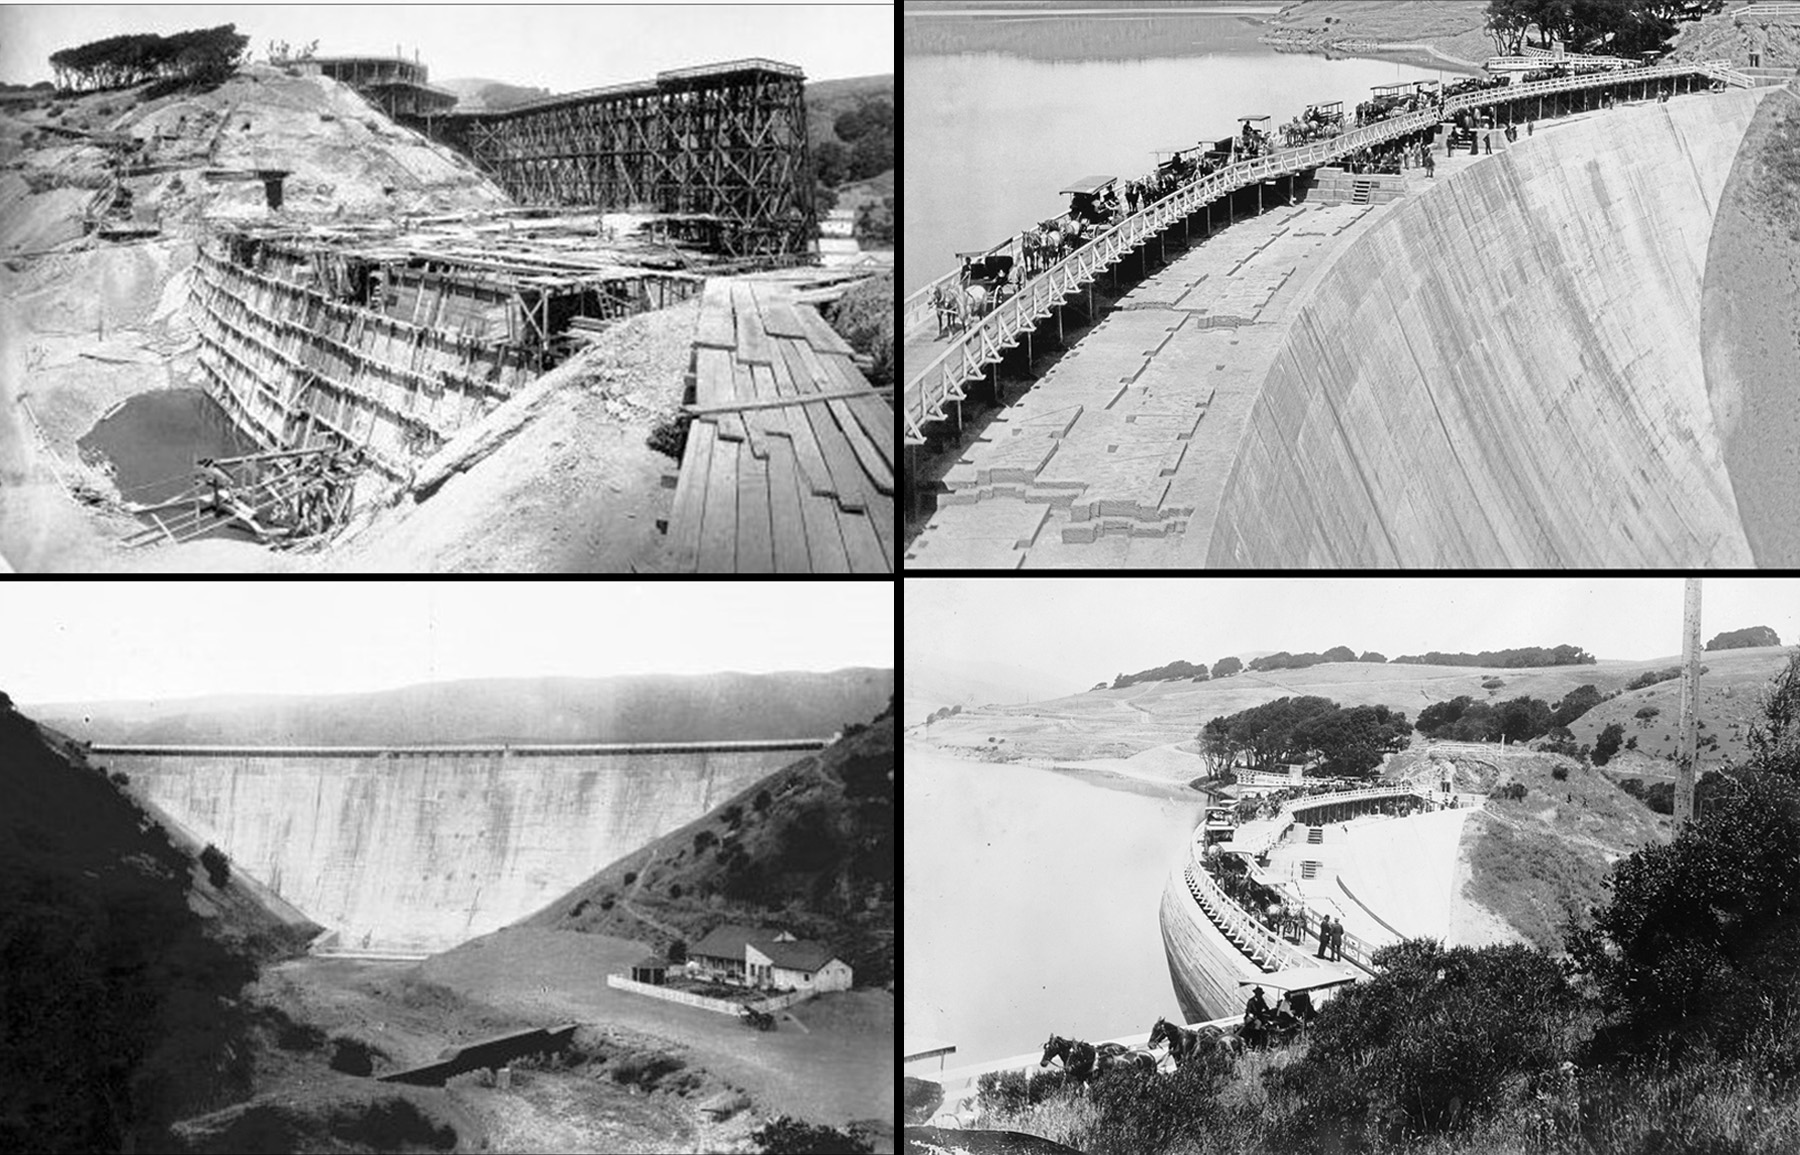 Photographs show the construction of a high concrete dam and the completed dam and carriages lined up at the top of the dam. 